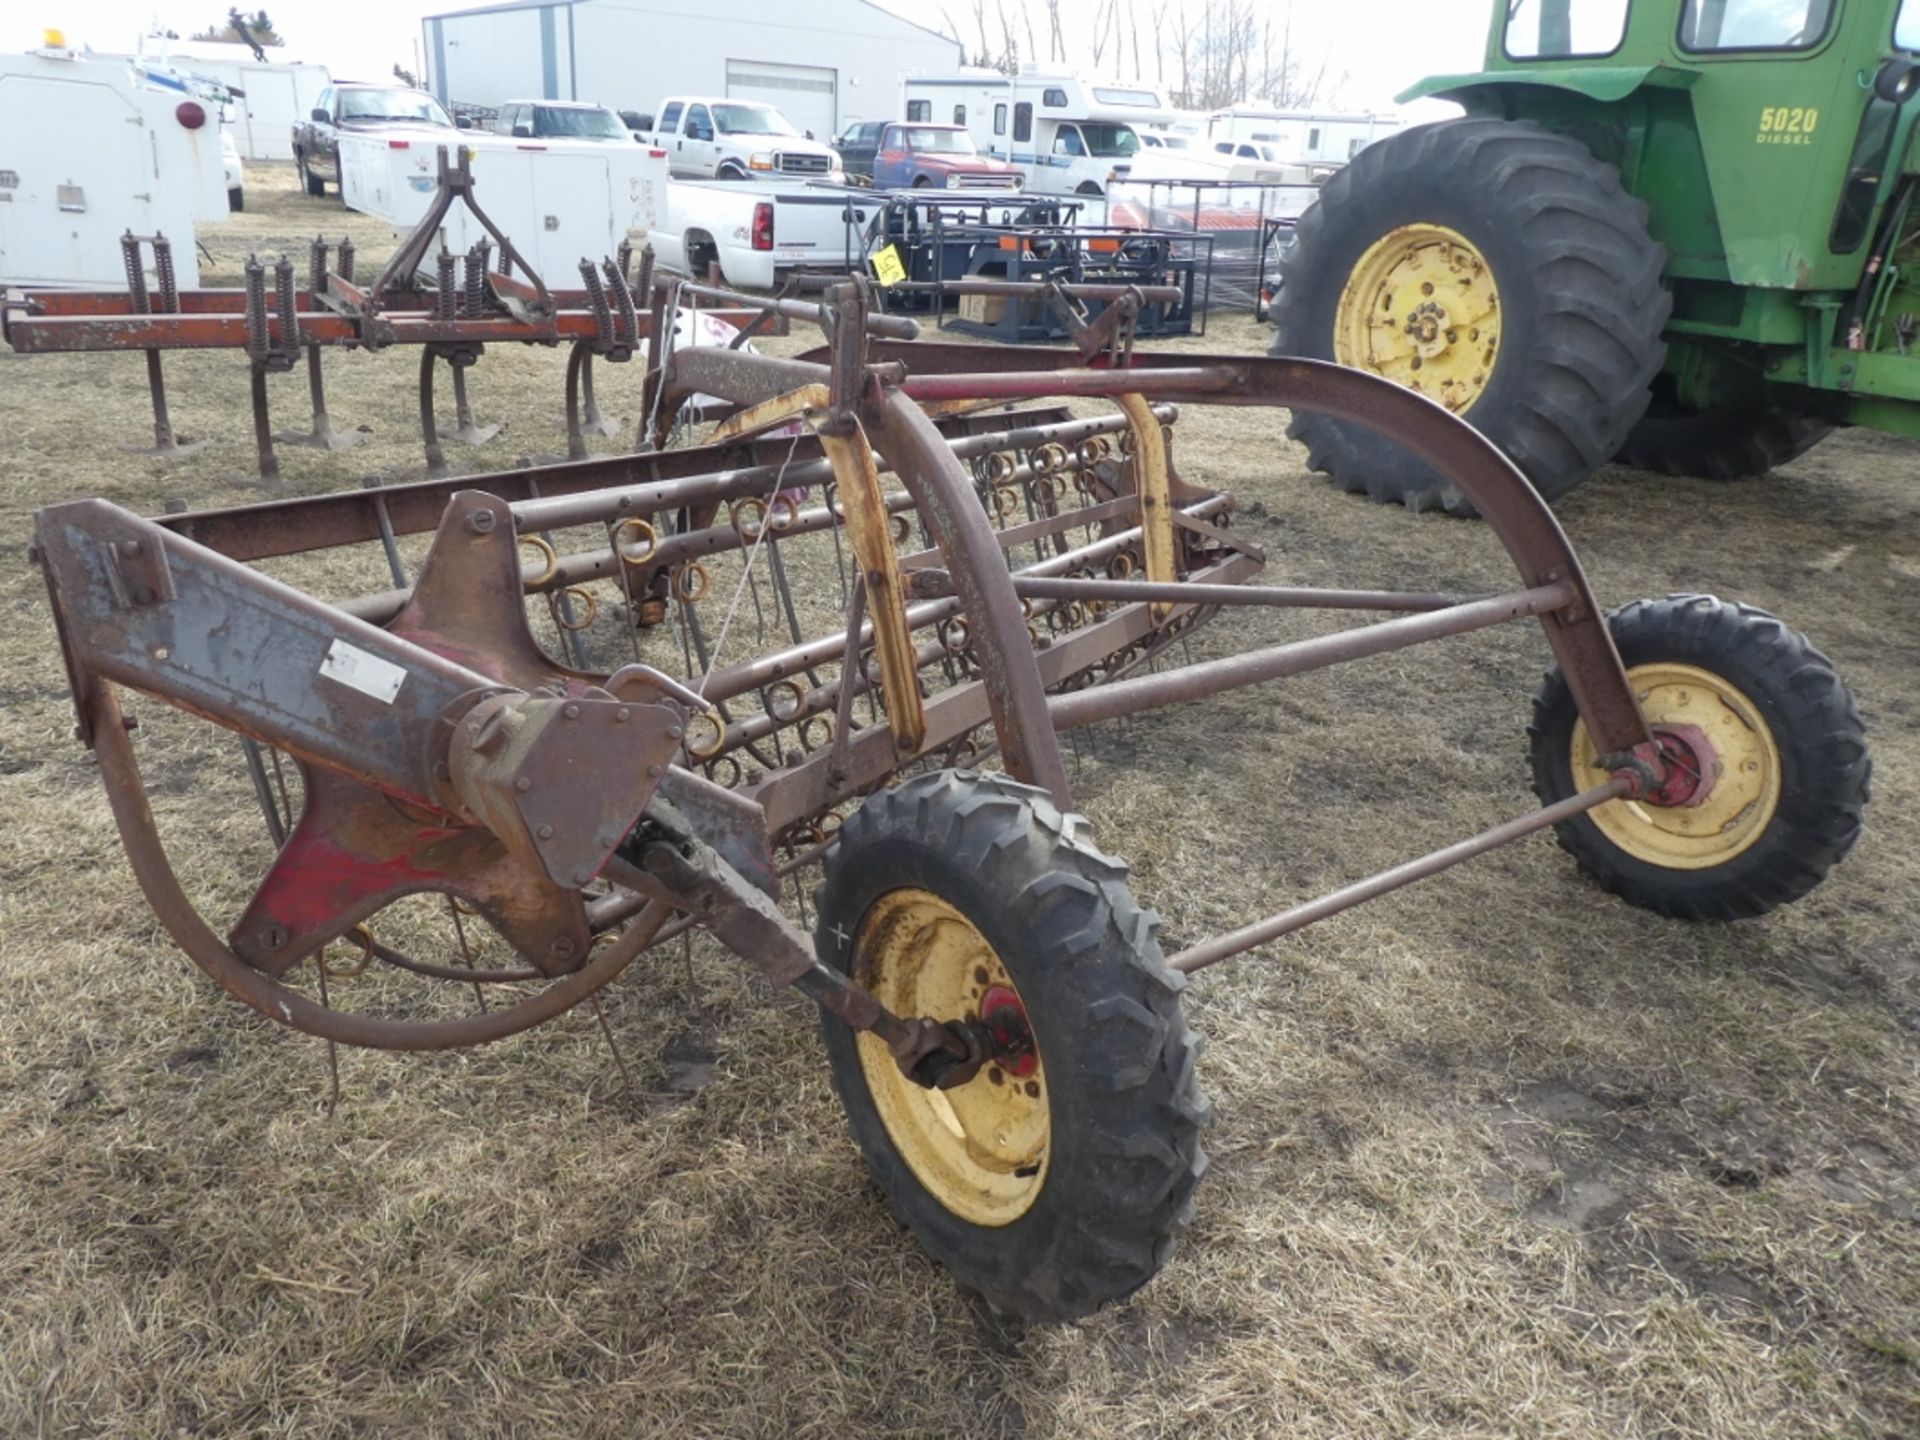 NEW HOLLAND 55 SIDE DELIVERY HAY RAKE, S/N 59435 - Image 3 of 3